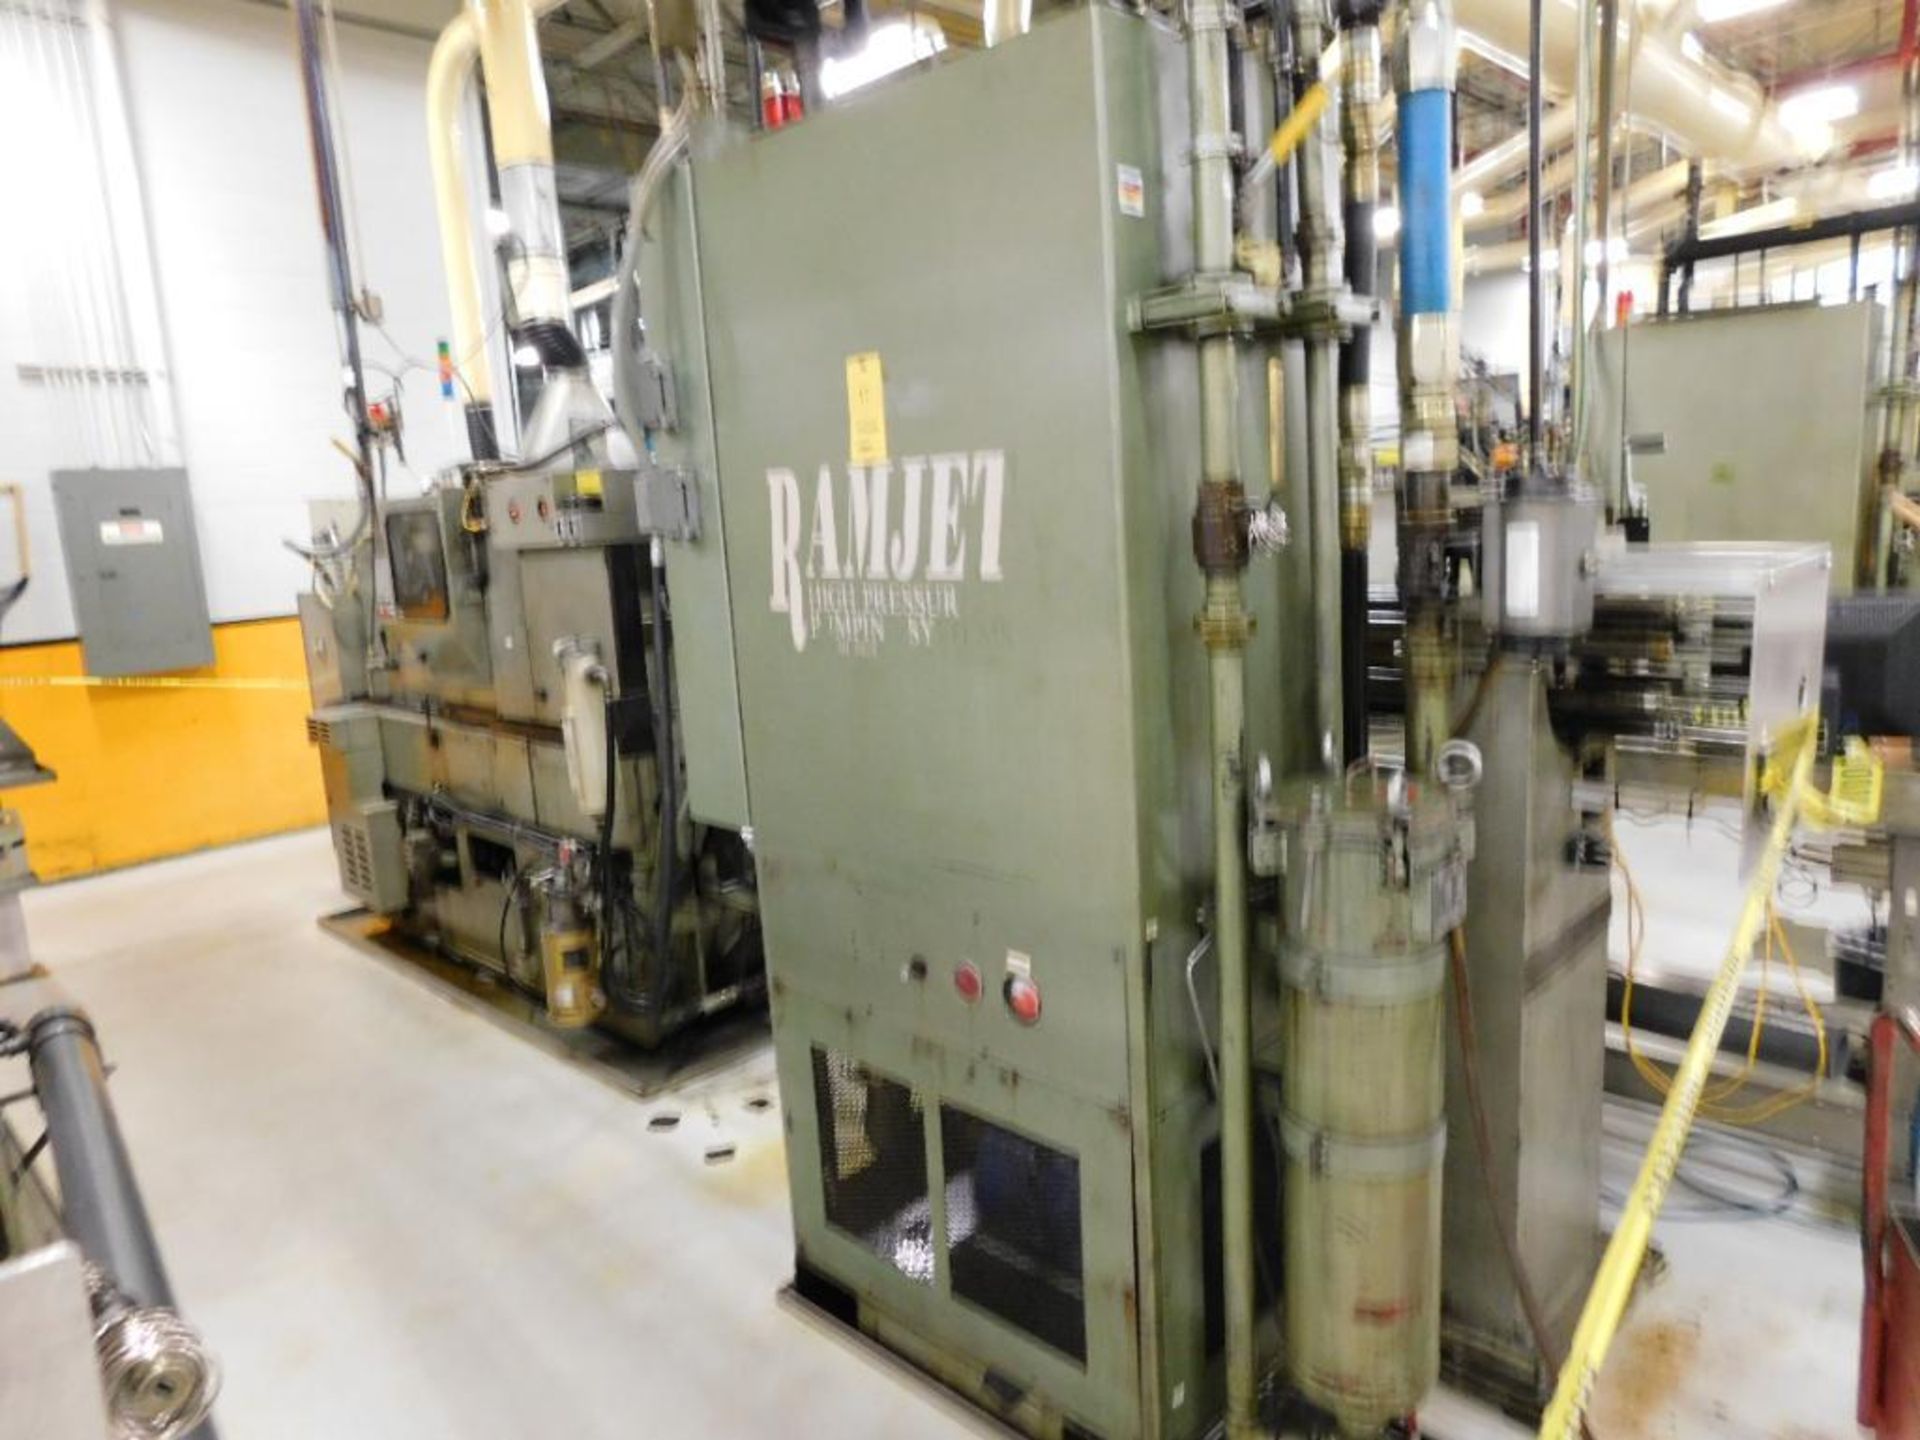 Ramjet High Pressure Pumping System - Image 2 of 3